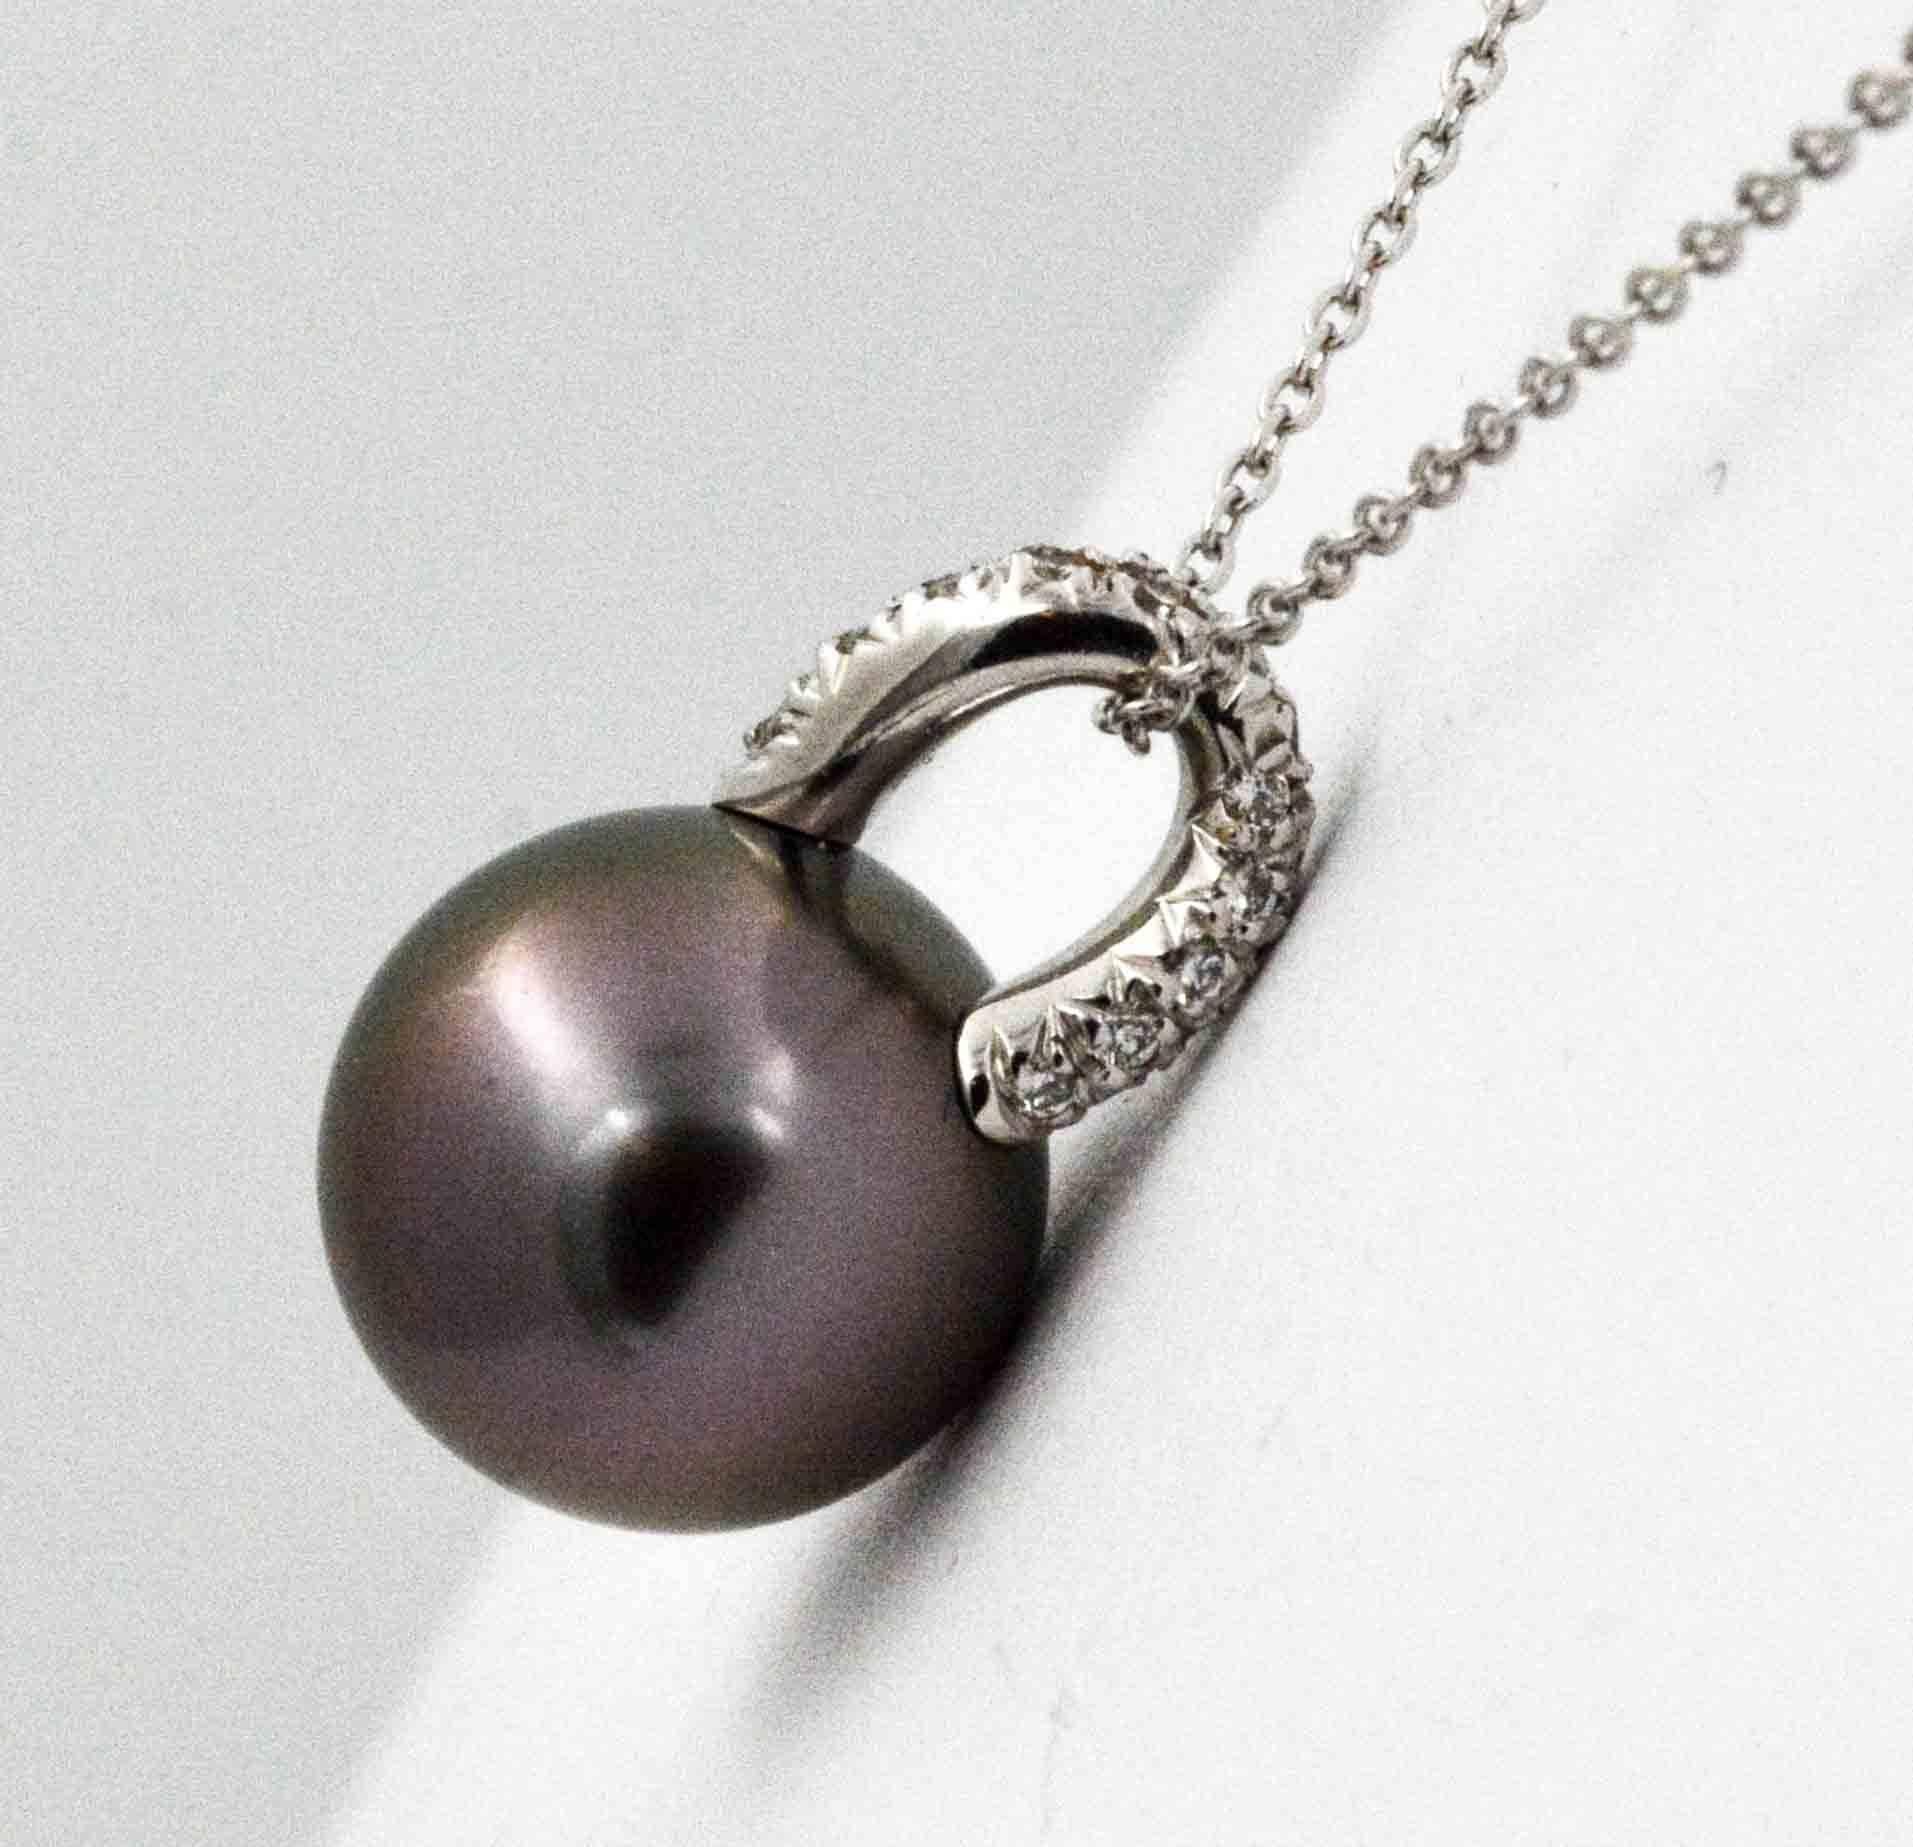 An enchanting 13 mm black Tahitian pearl ornamented with white gold is endlessly versatile. The 18 karat white gold bail is U-shaped and has 30 pave set diamonds 0.22 carat total weight (G-H color and VS internal clarity). This spectacular Tahitian